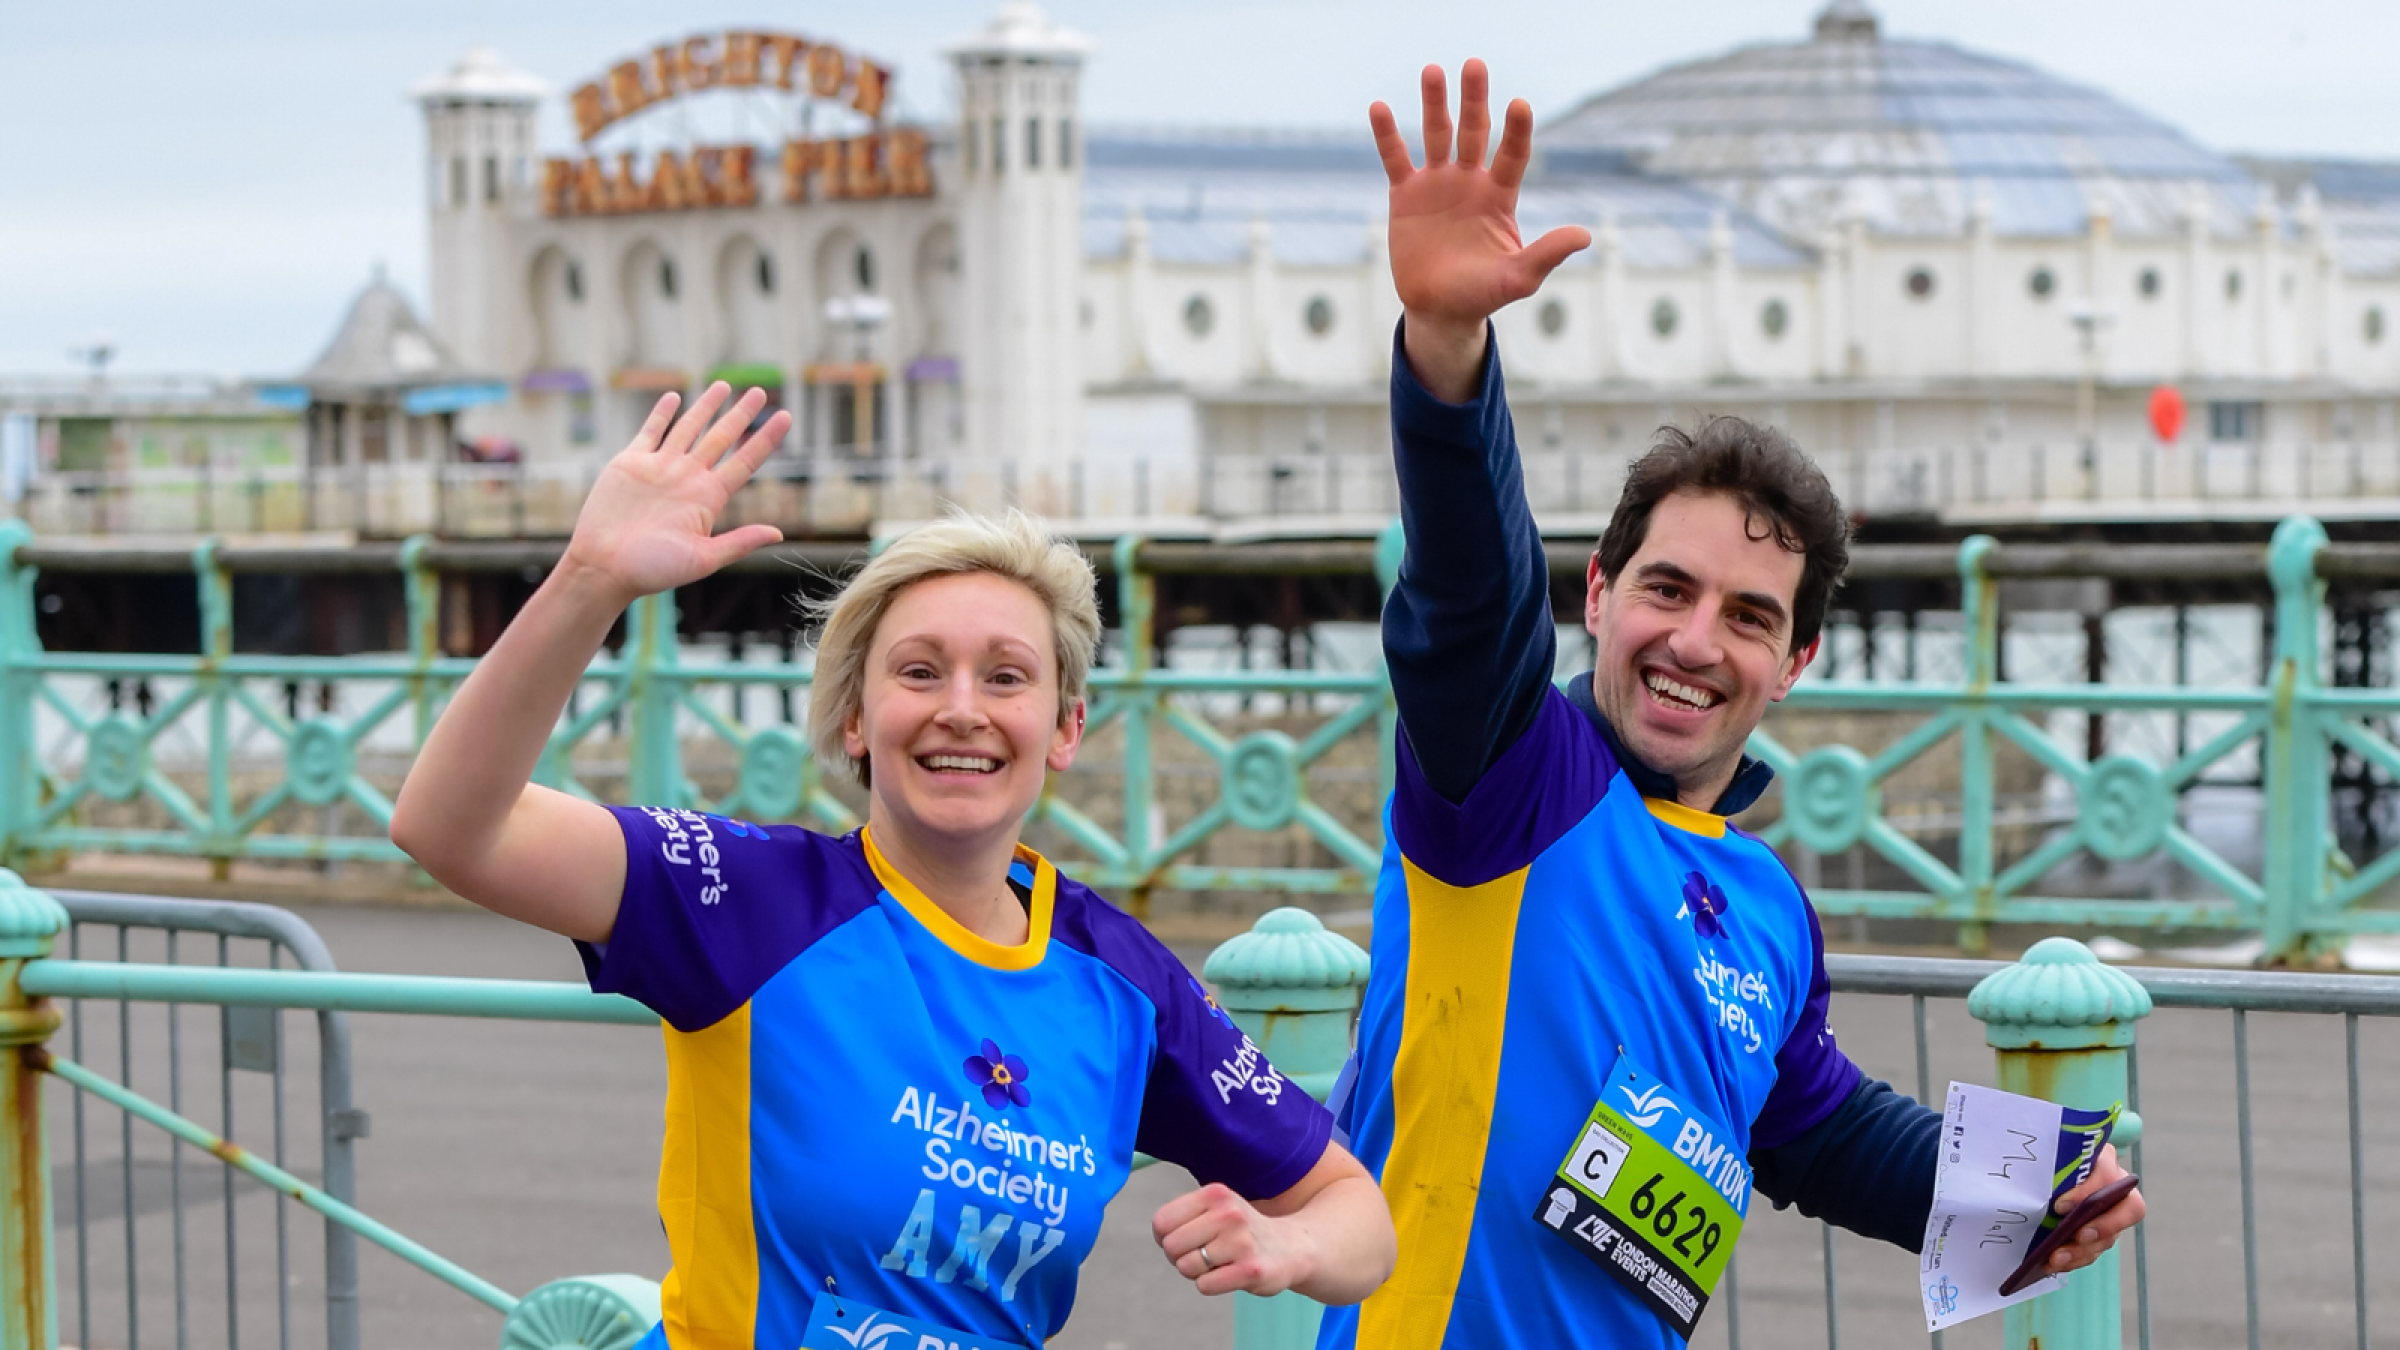 Two Alzheimer's Society runners wave as they pass Brighton Pier